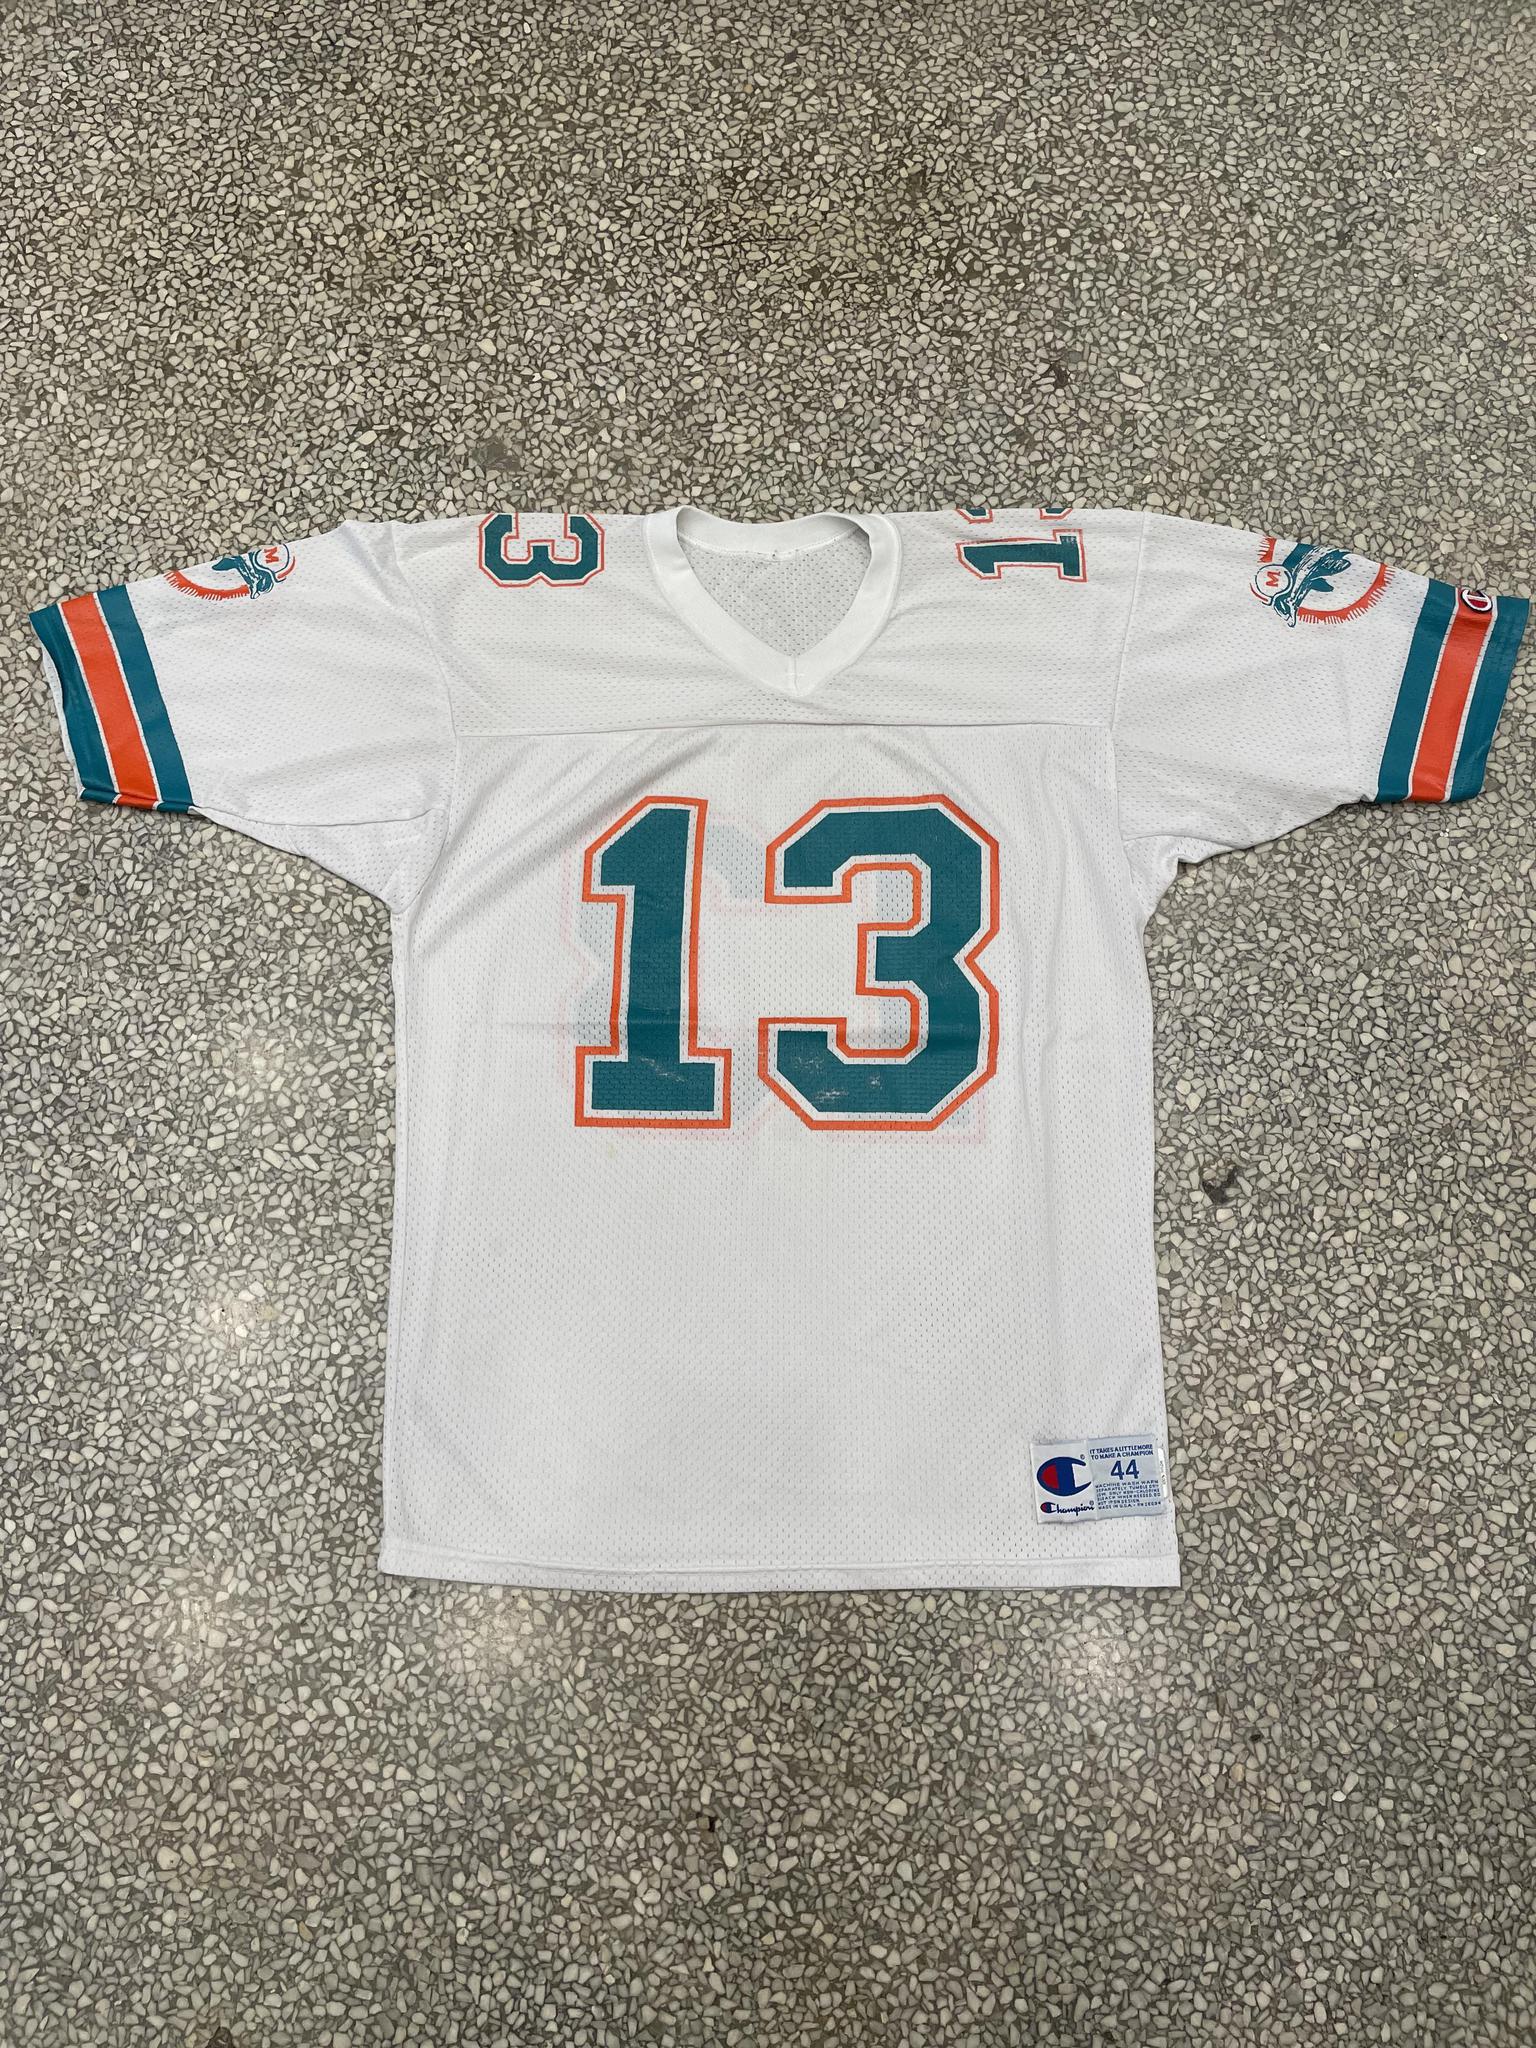 dolphins red jersey